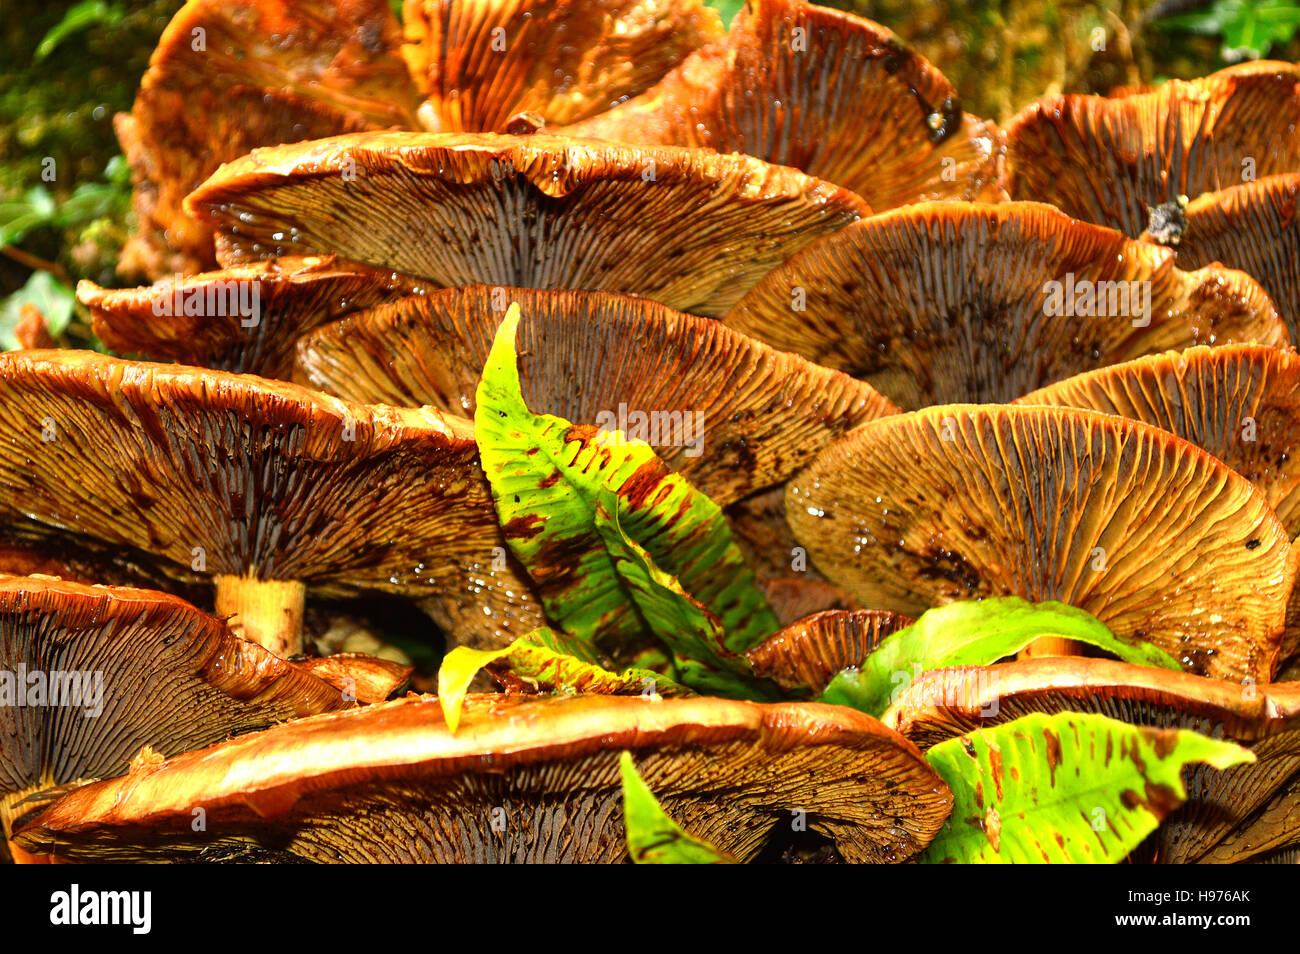 Gills, underside of a group of Toadstools Stock Photo